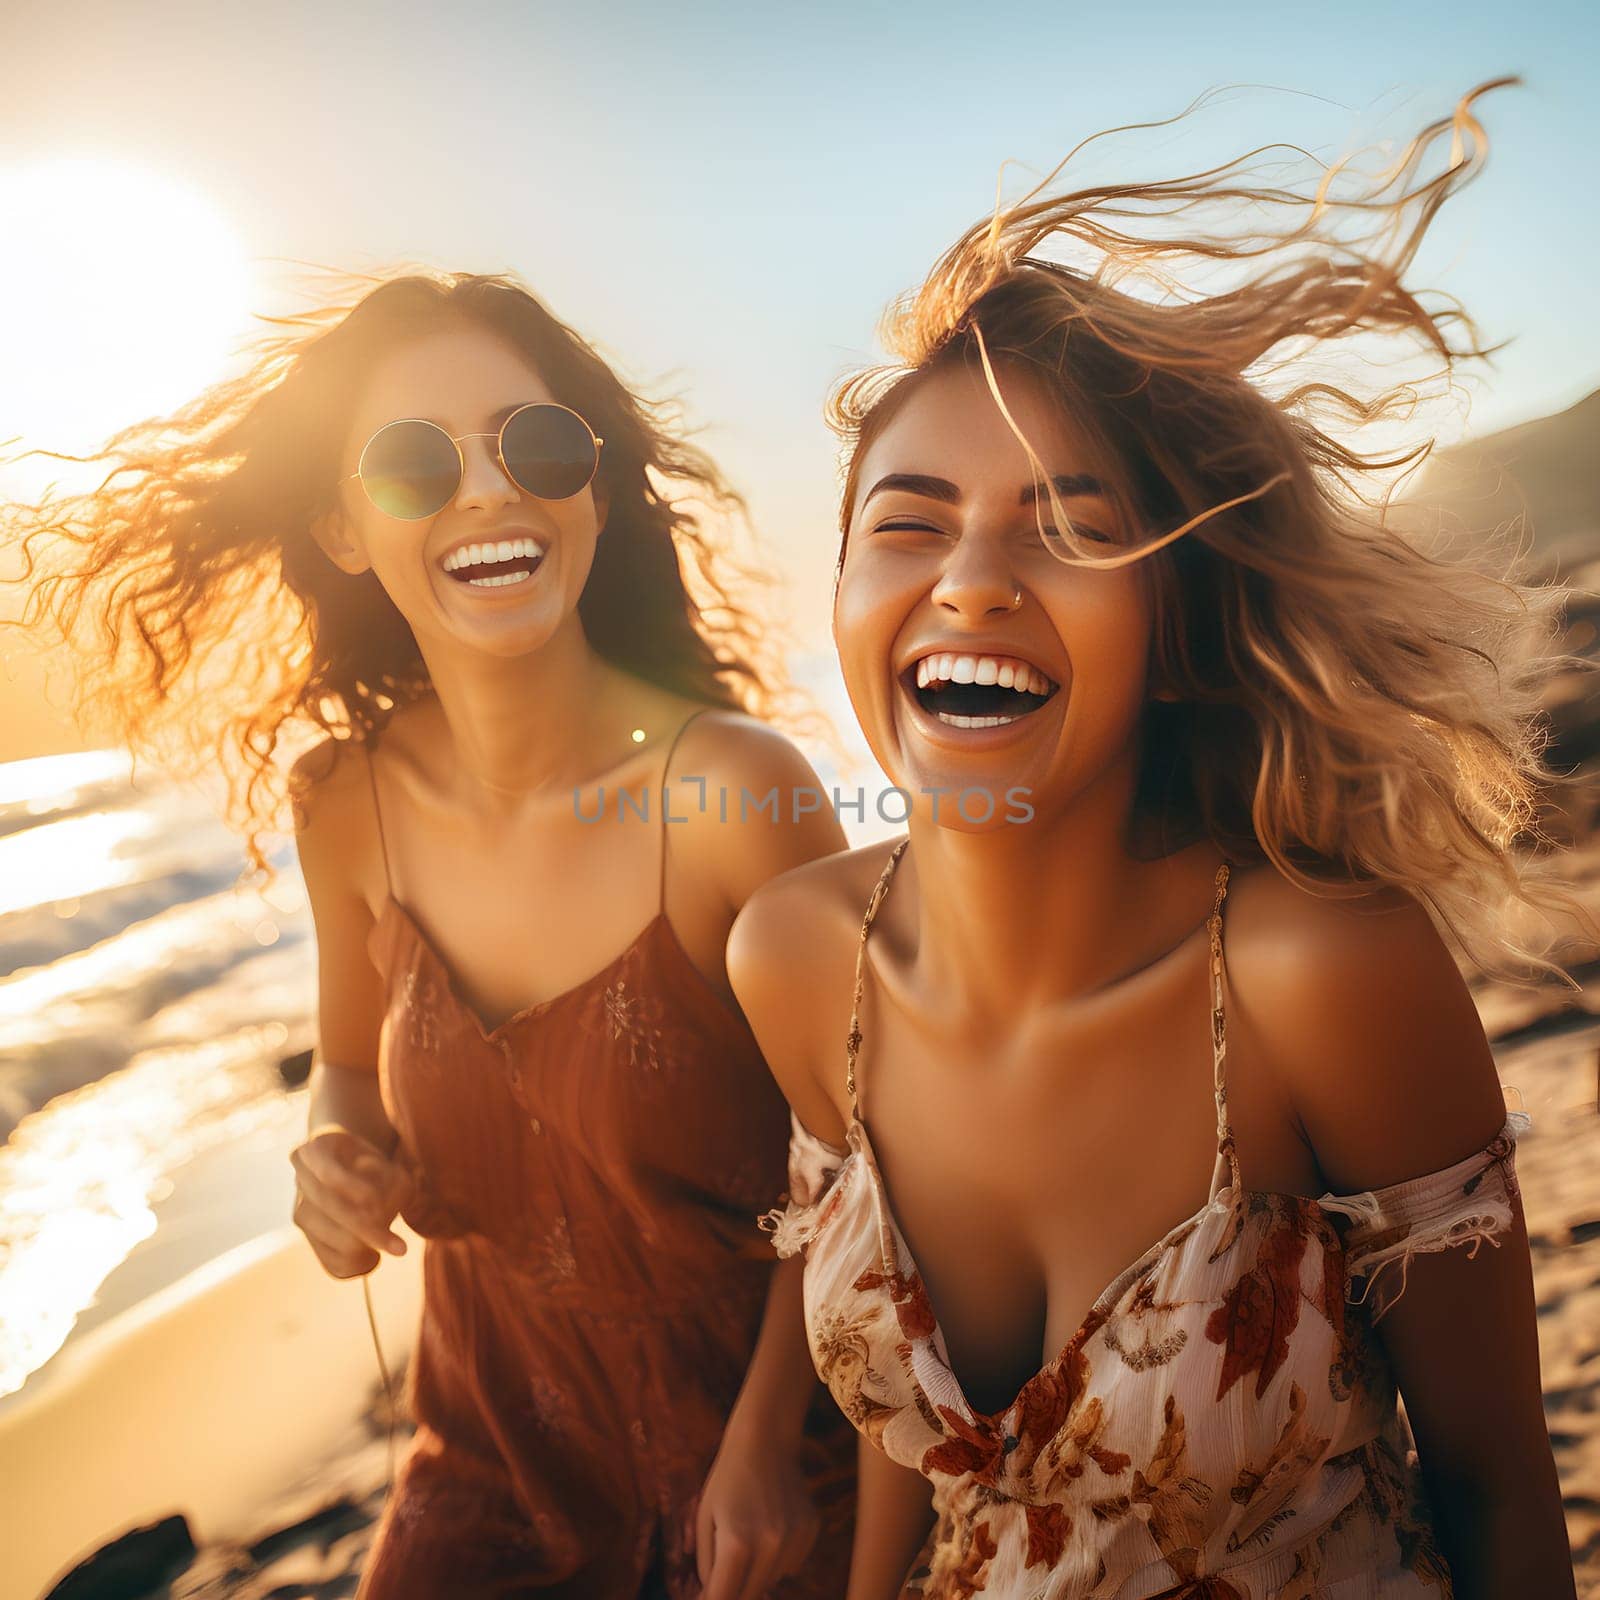 Two young women at the beach smiling and playing at sunset